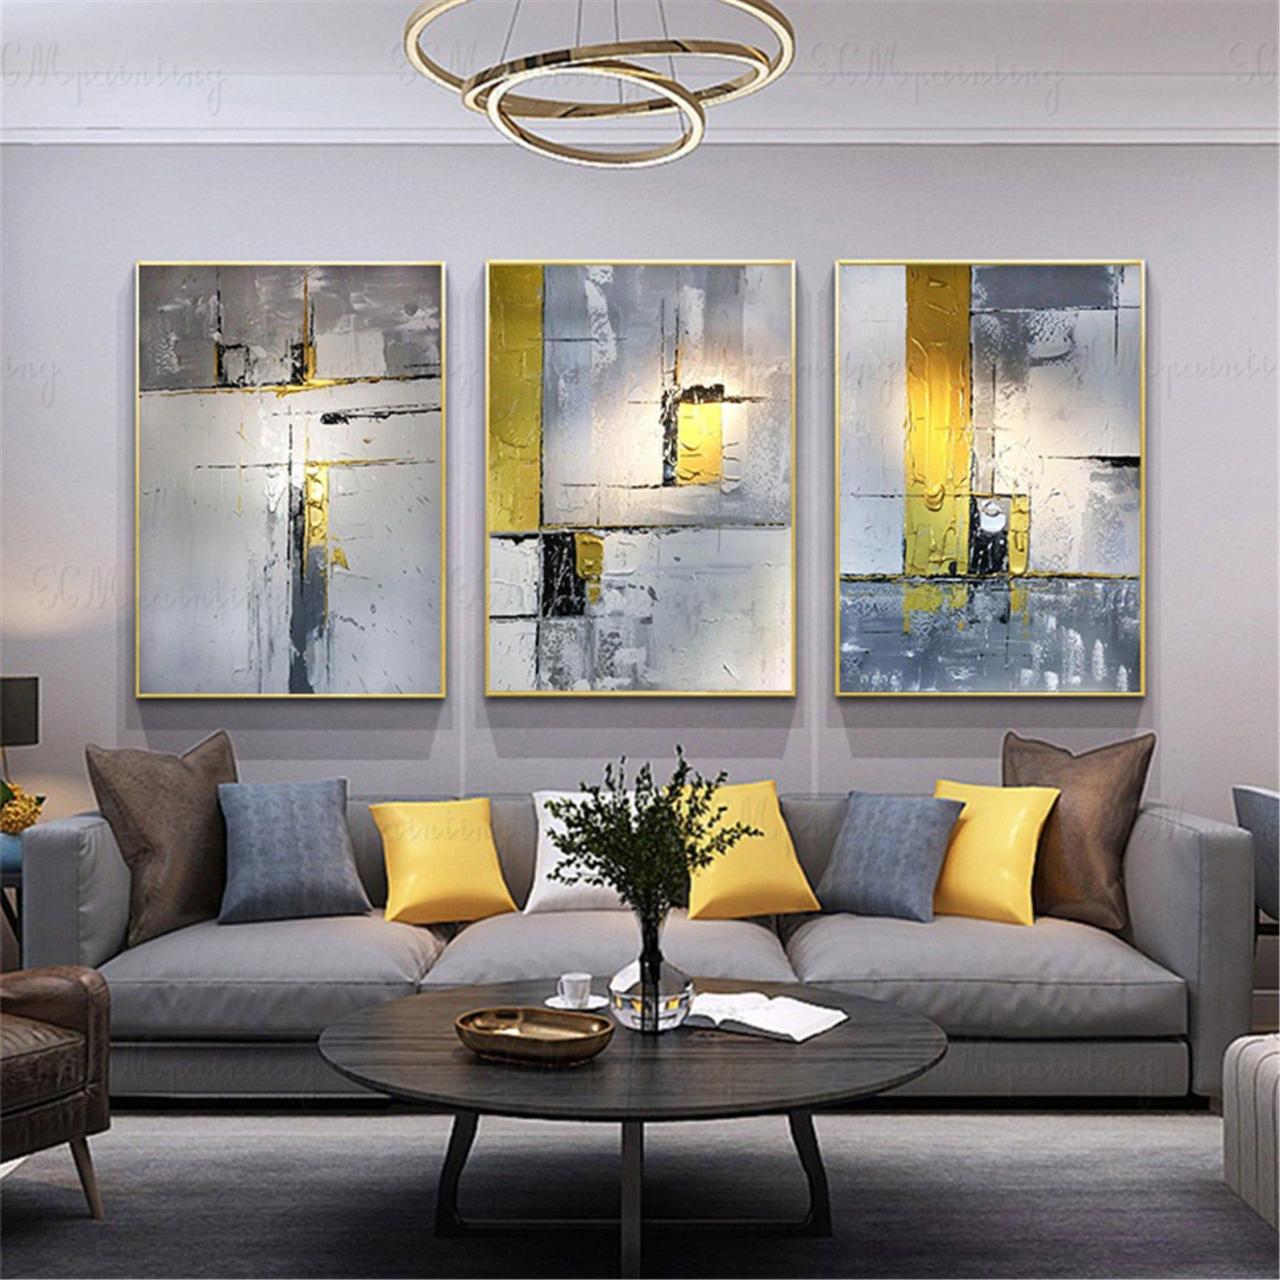 Wall canvas living painting decoration beautiful print room sunset unframed sea decor aliexpress pieces gift prints deco calligraphy salon visitar